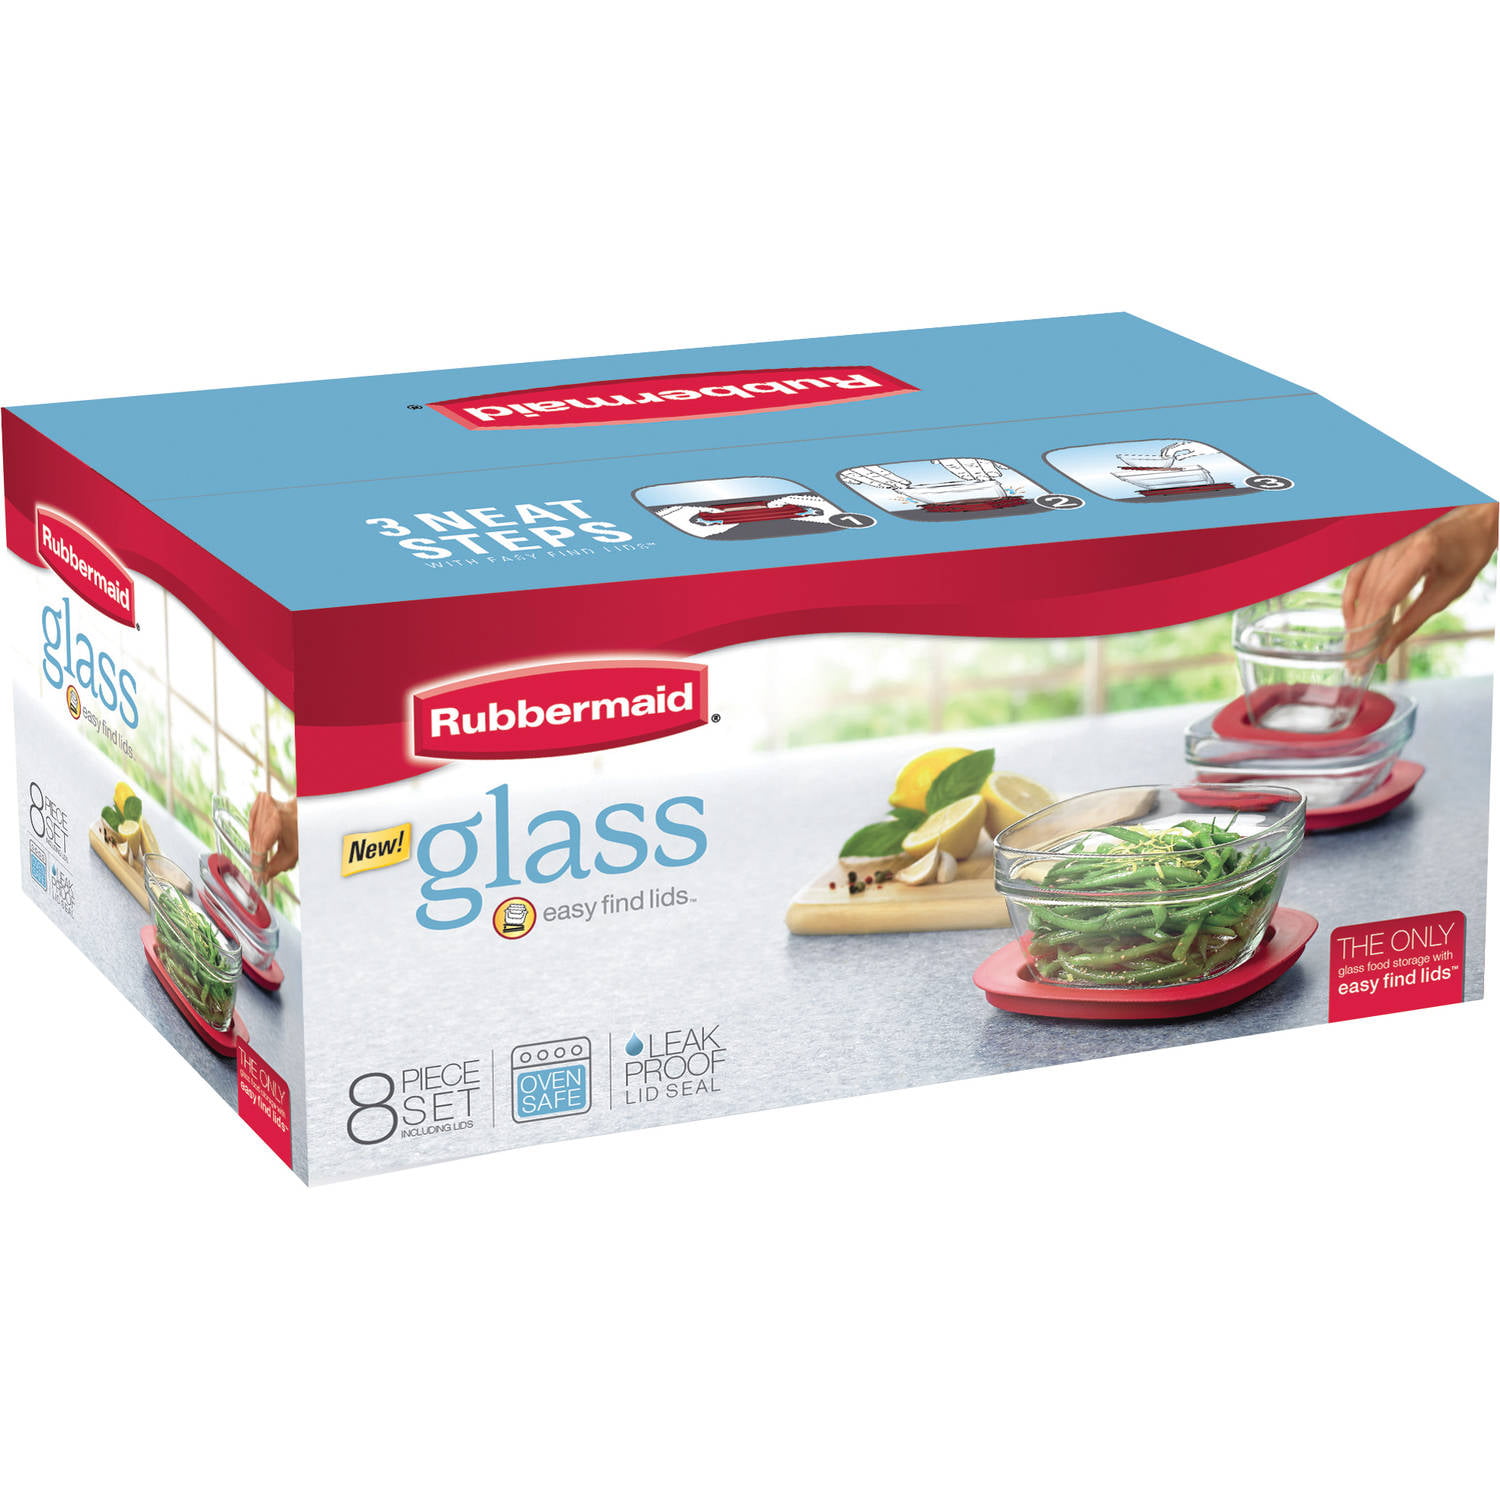 Save on Rubbermaid Brilliance Glass Oven Container 8.0 Cup Order Online  Delivery